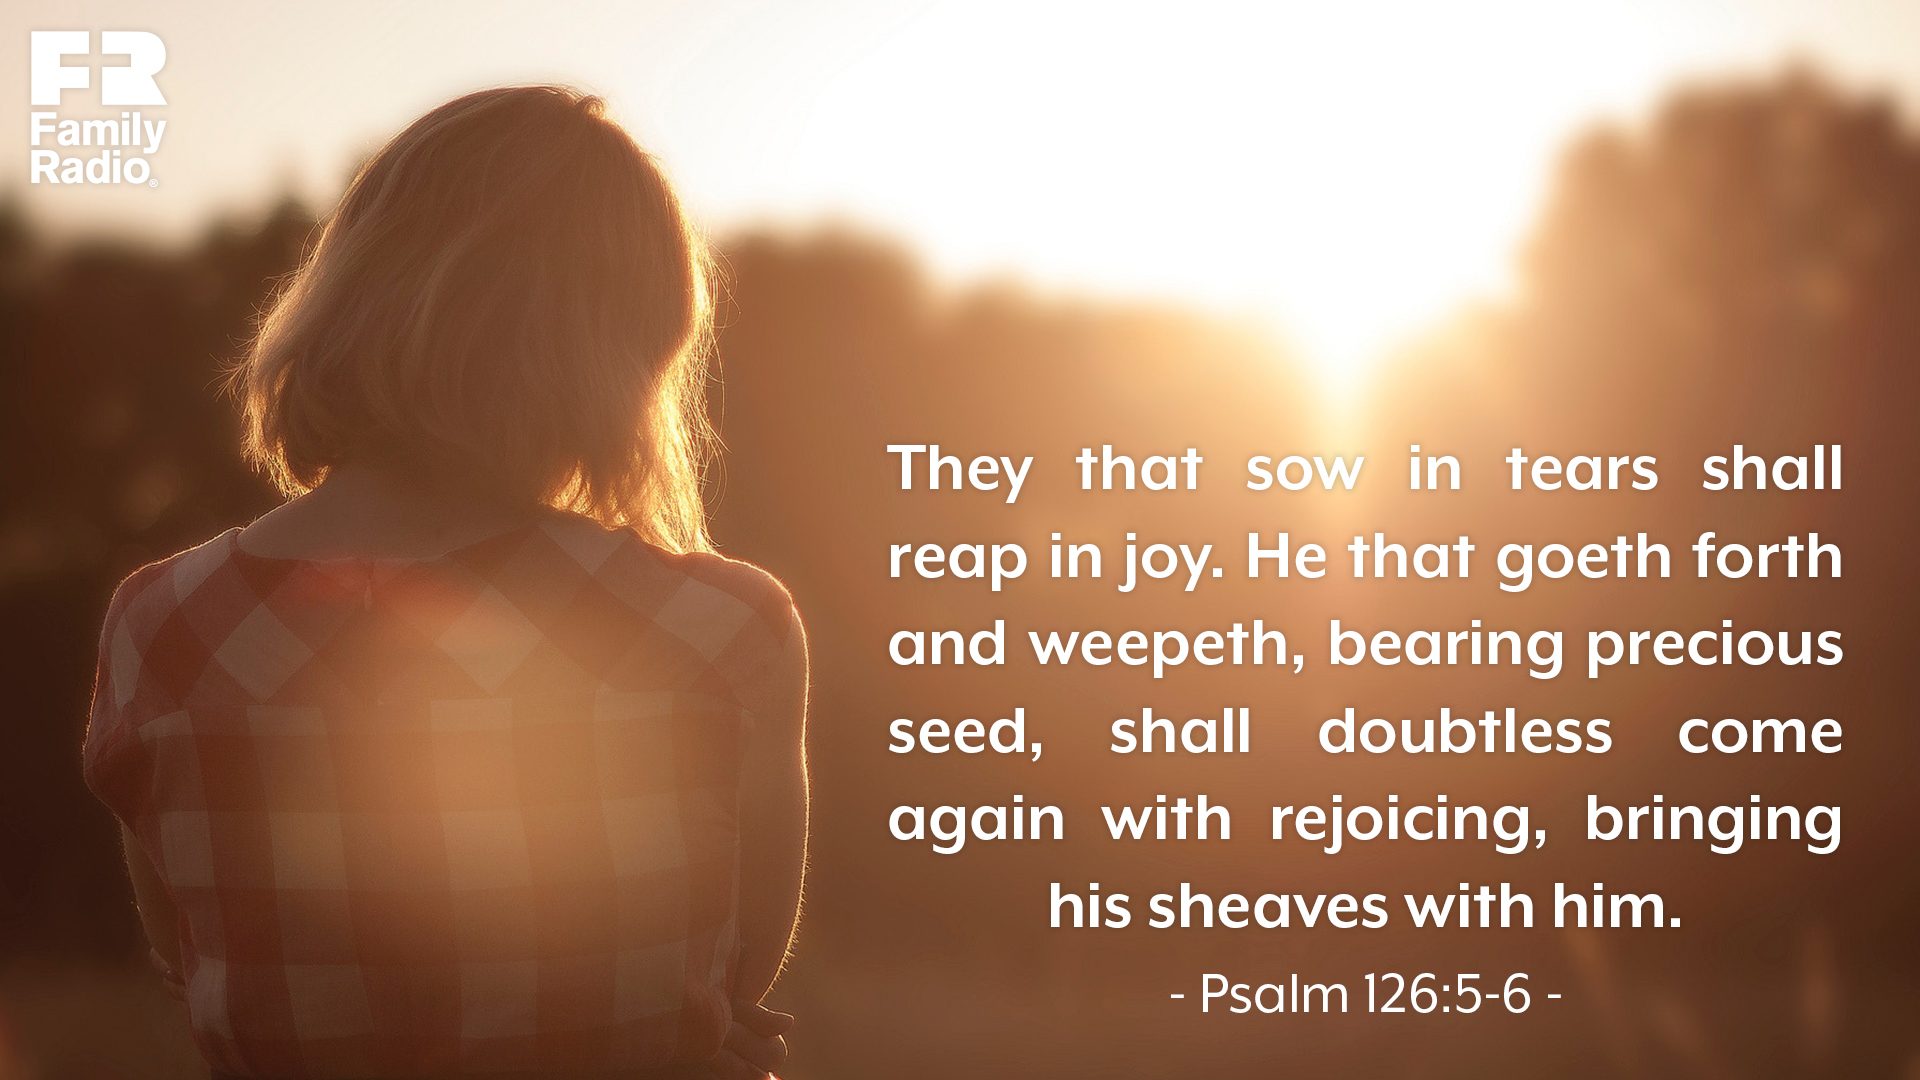 "They that sow in tears shall reap in joy. He that goeth forth and weepeth, bearing precious seed, shall doubtless come again with rejoicing, bringing his sheaves with him."